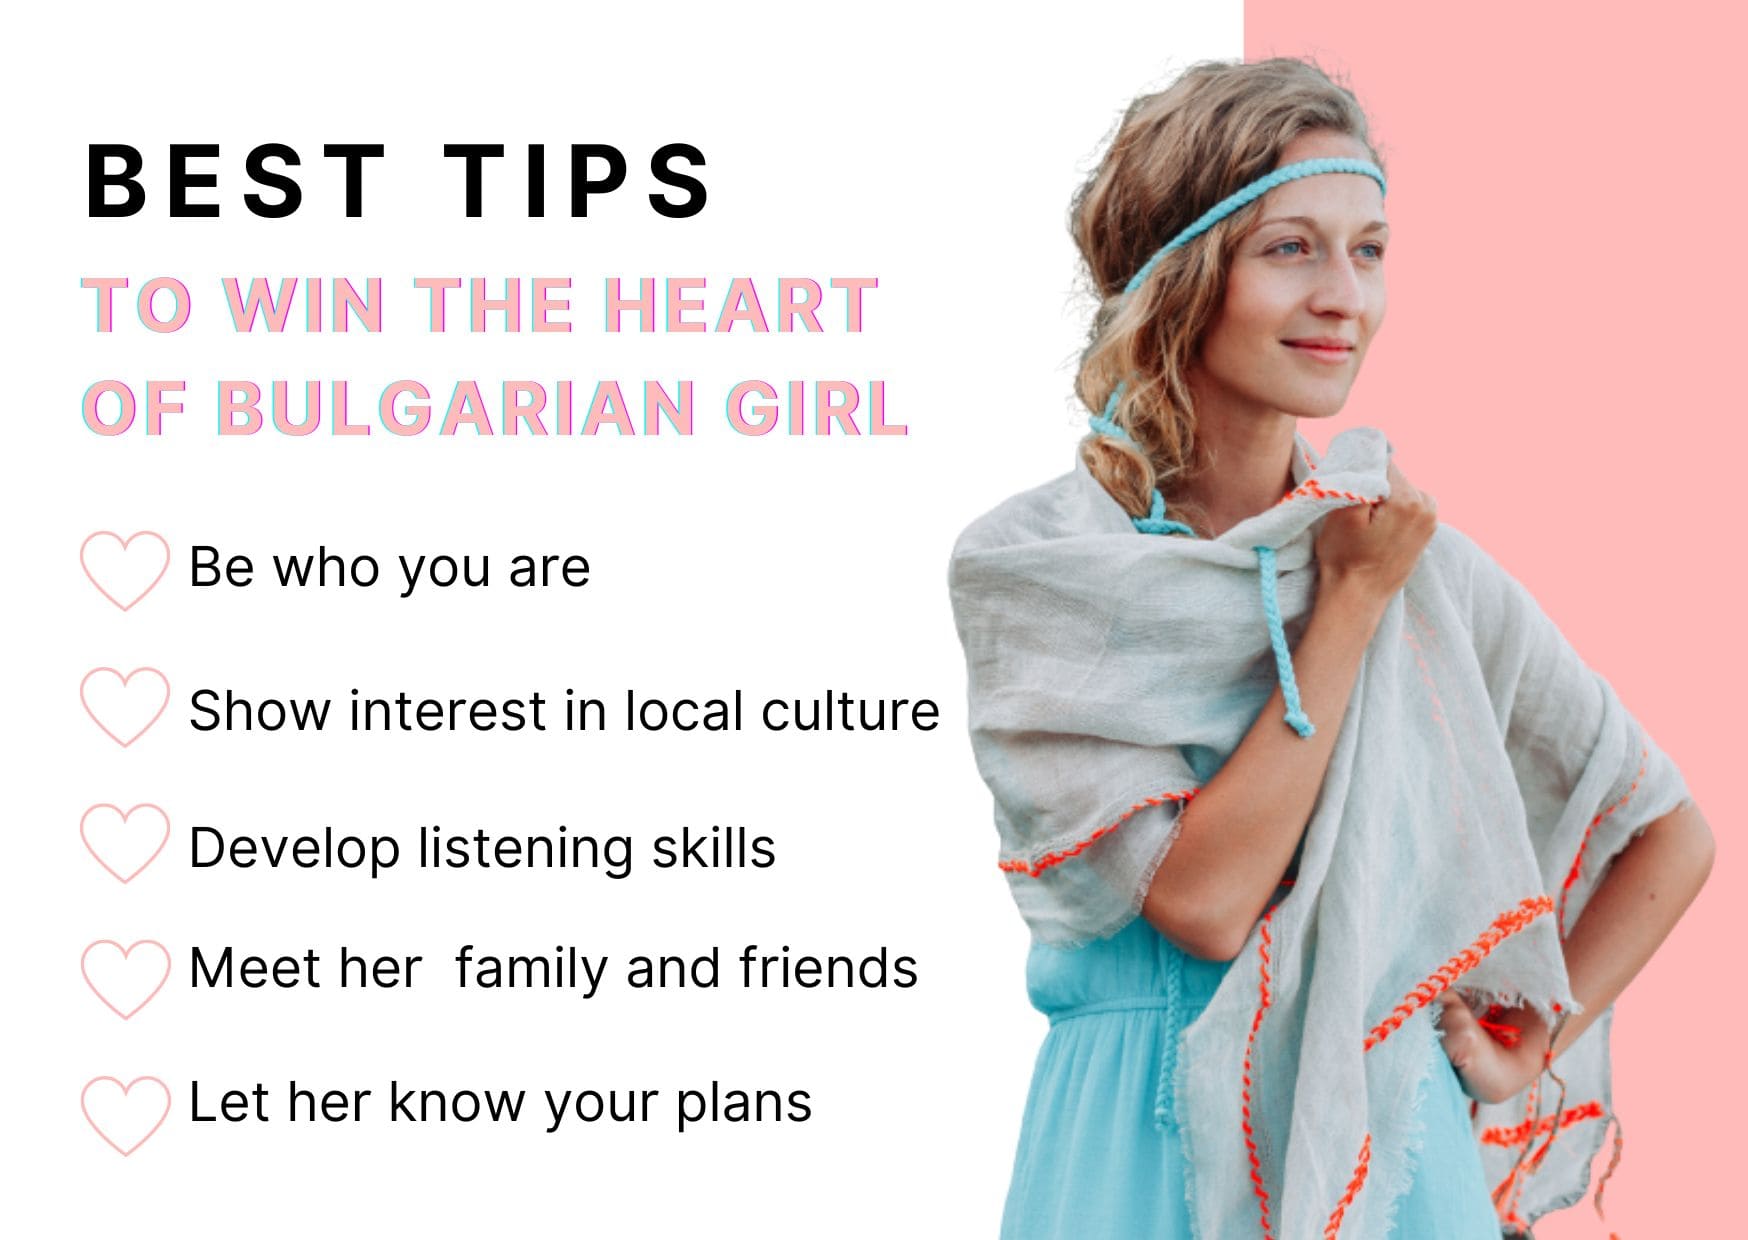 How to Win the Heart
of Bulgarian Girl